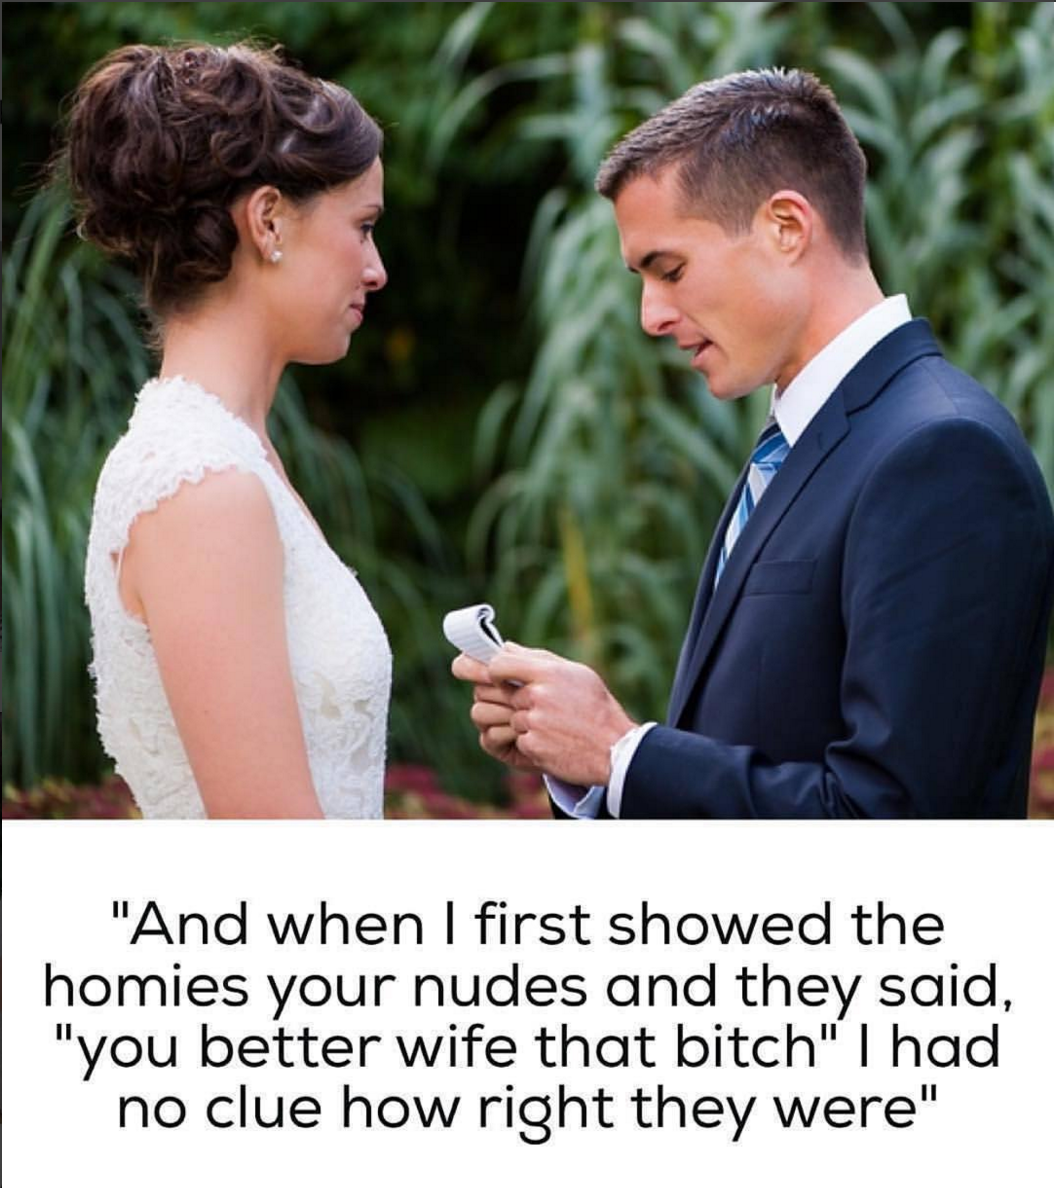 proud of your bf meme - "And when I first showed the homies your nudes and they said, "you better wife that bitch" I had no clue how right they were"